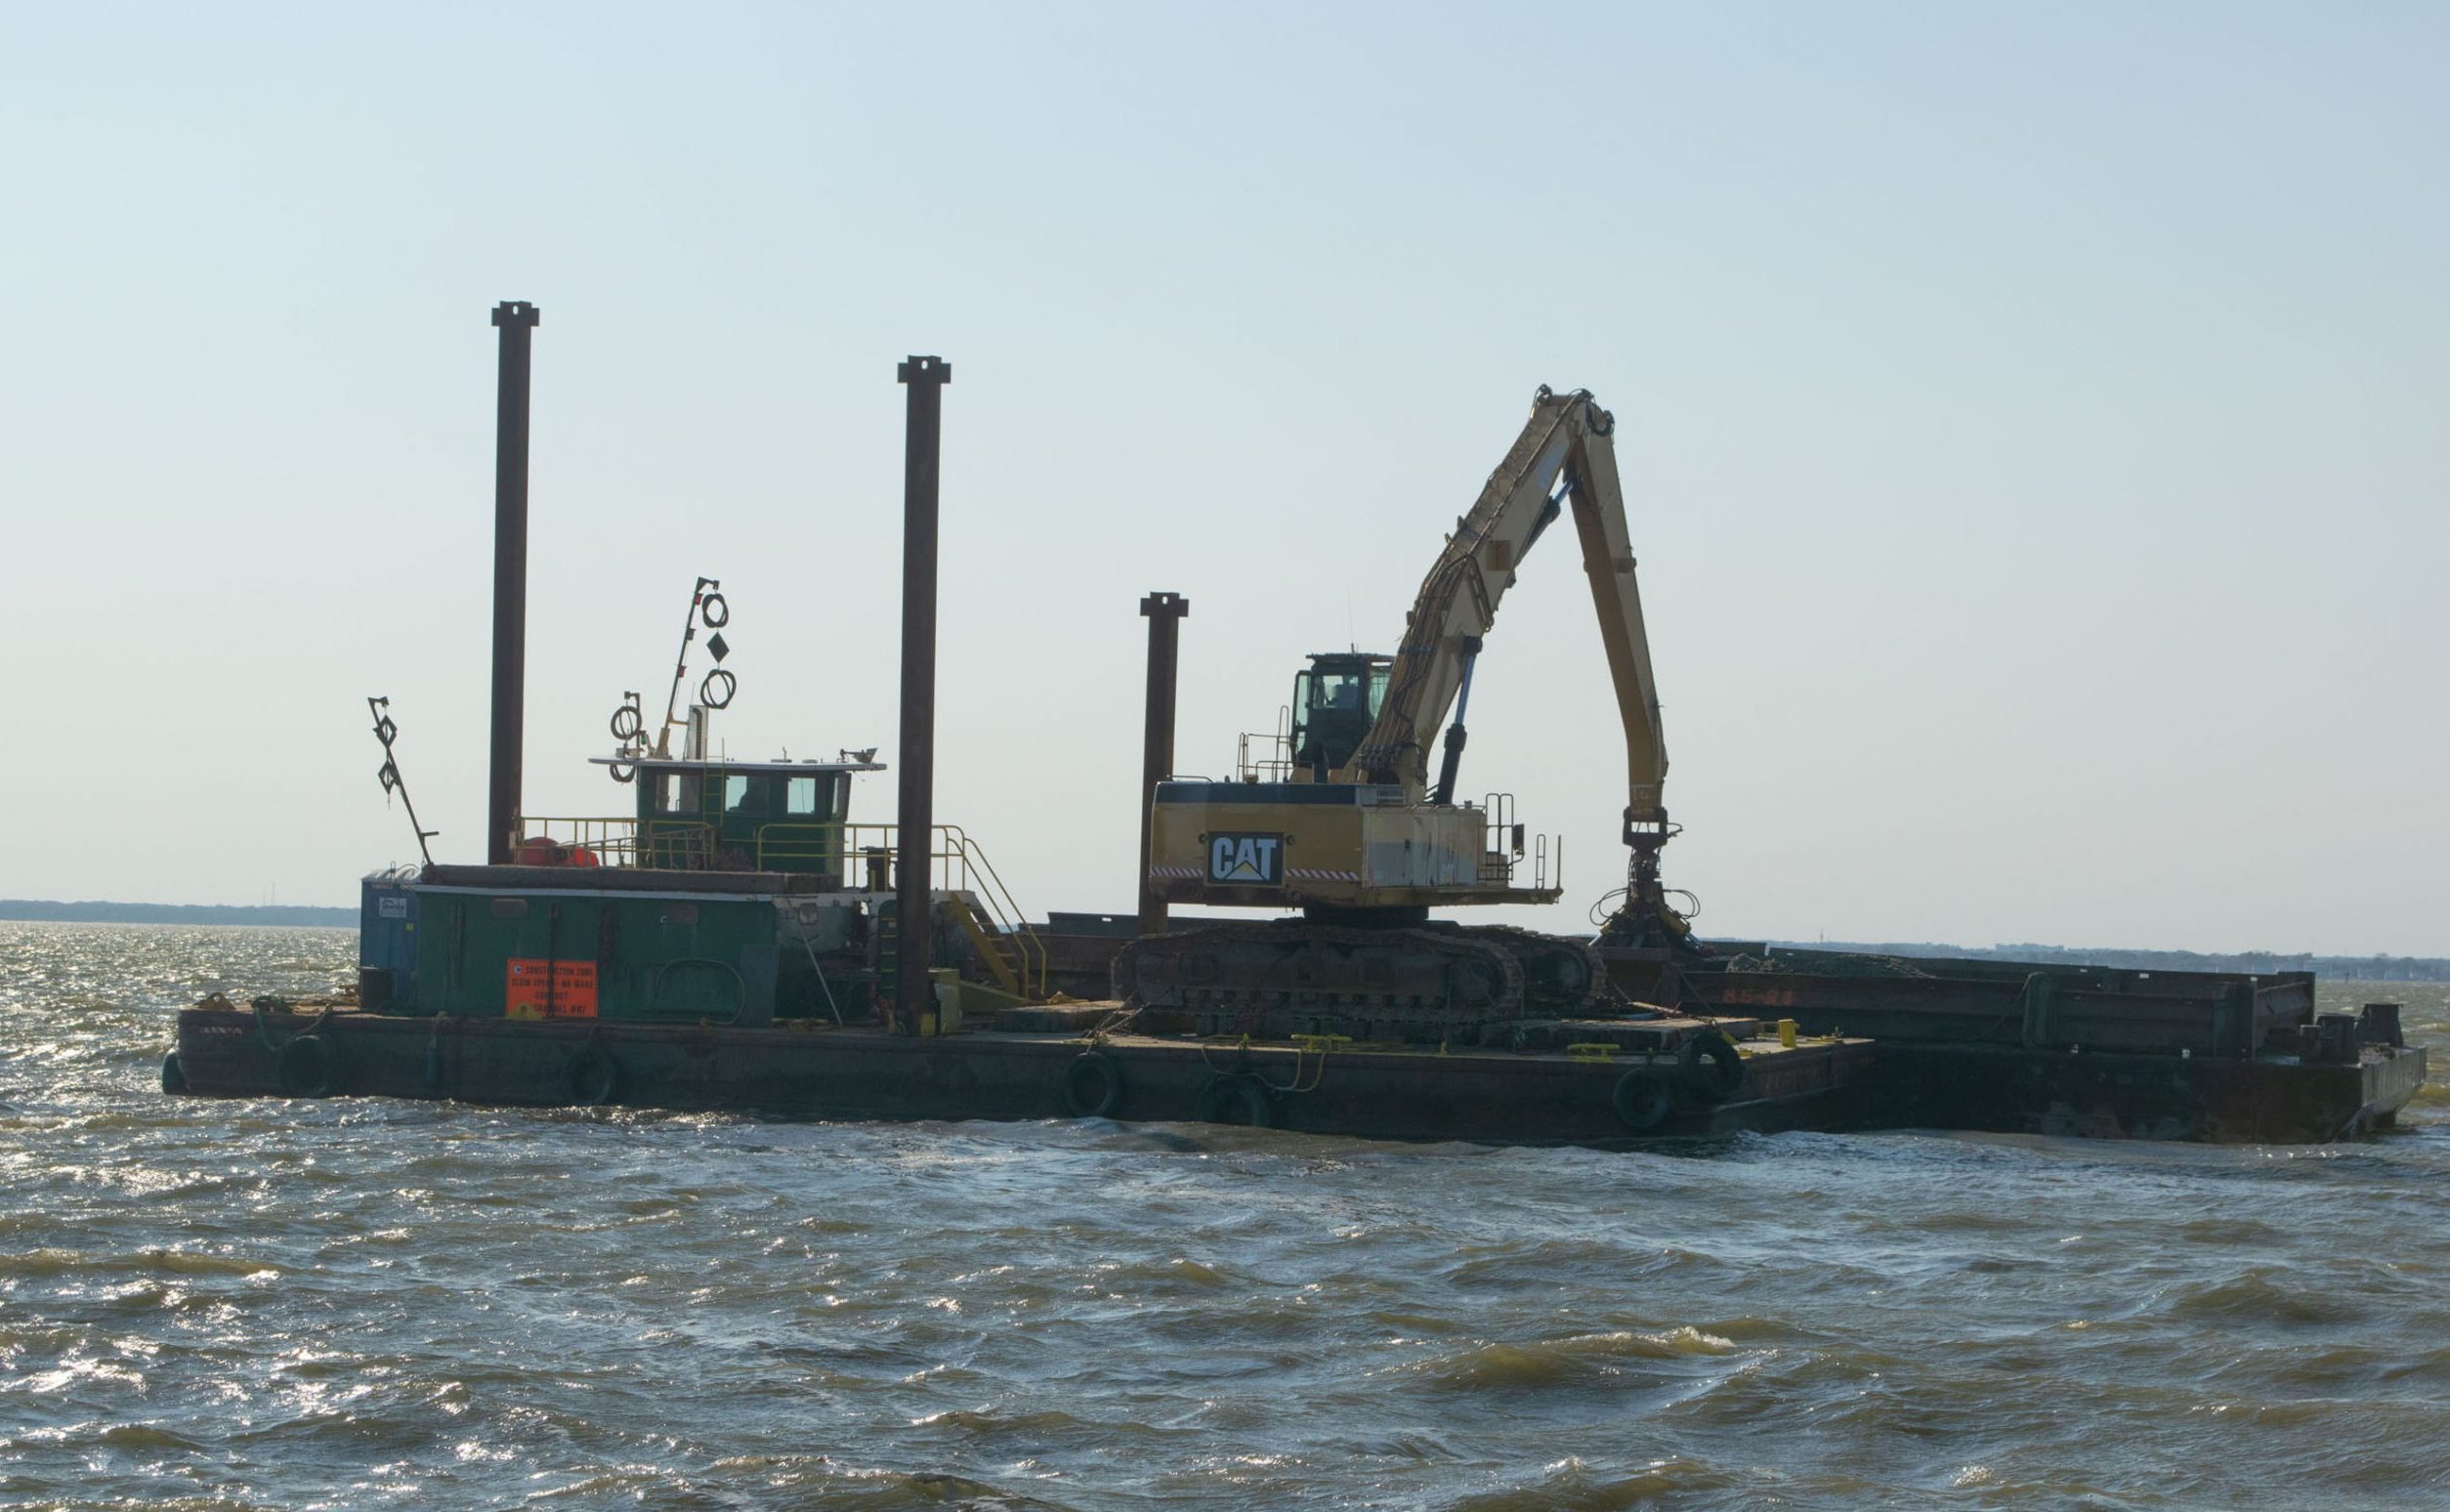 A dredge boat empties material at Bayside Park, Oct. 2020. (Photo: Daniel Nee)